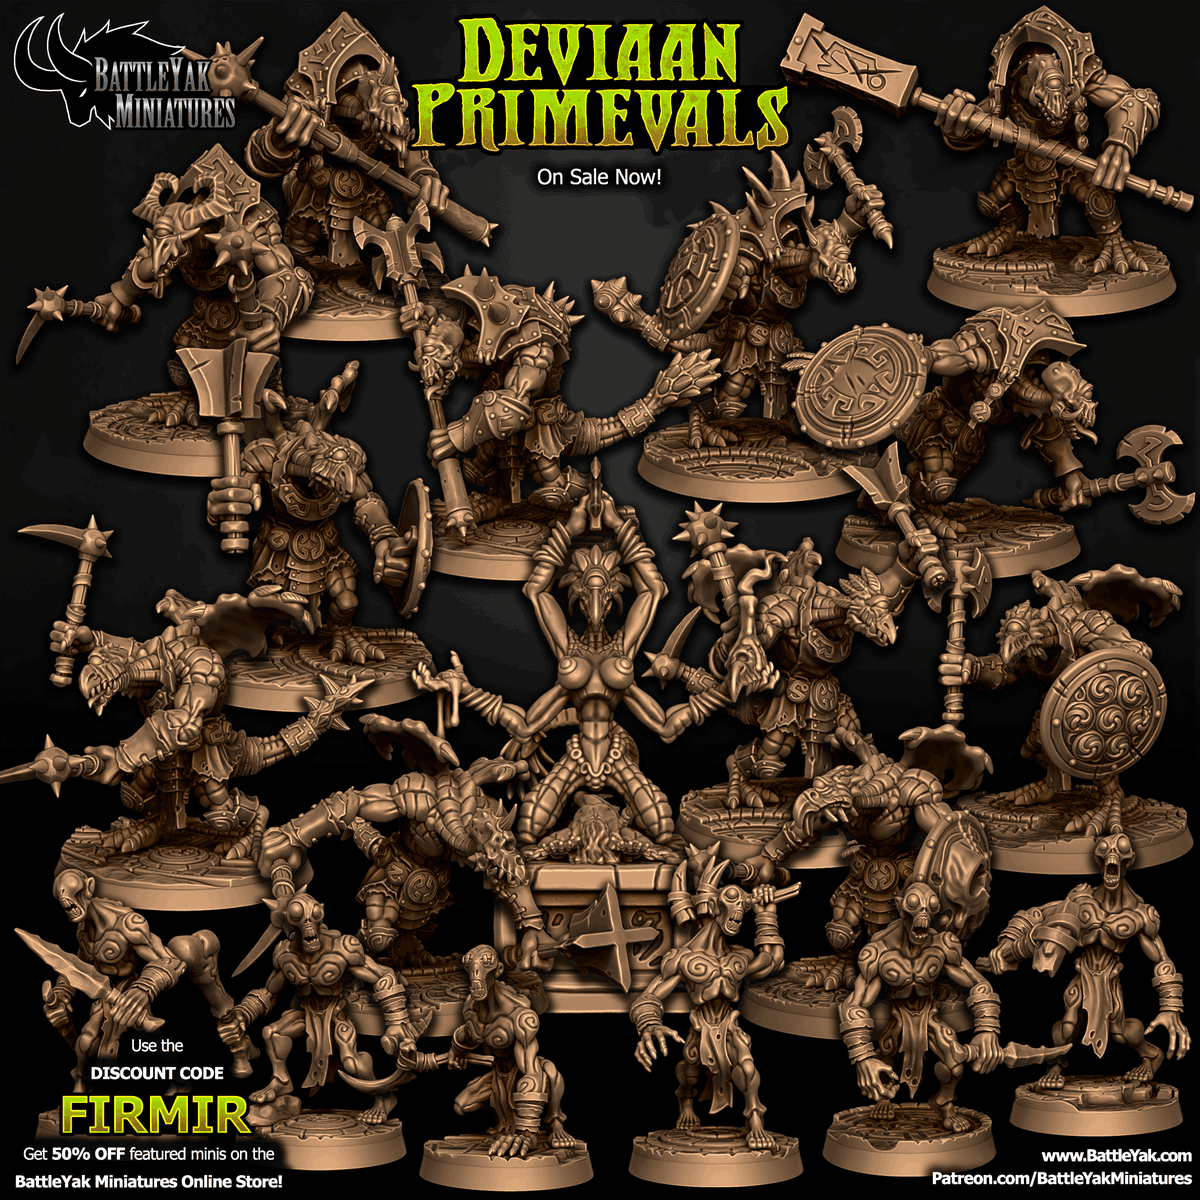 The latest sale from Battle Yak Miniatures is available now! battleyak.com #3dprinting #tabletopgaming #3Dsculpting #dnd #pathfinder #wargaming #ttrpg #fimir #eldritch